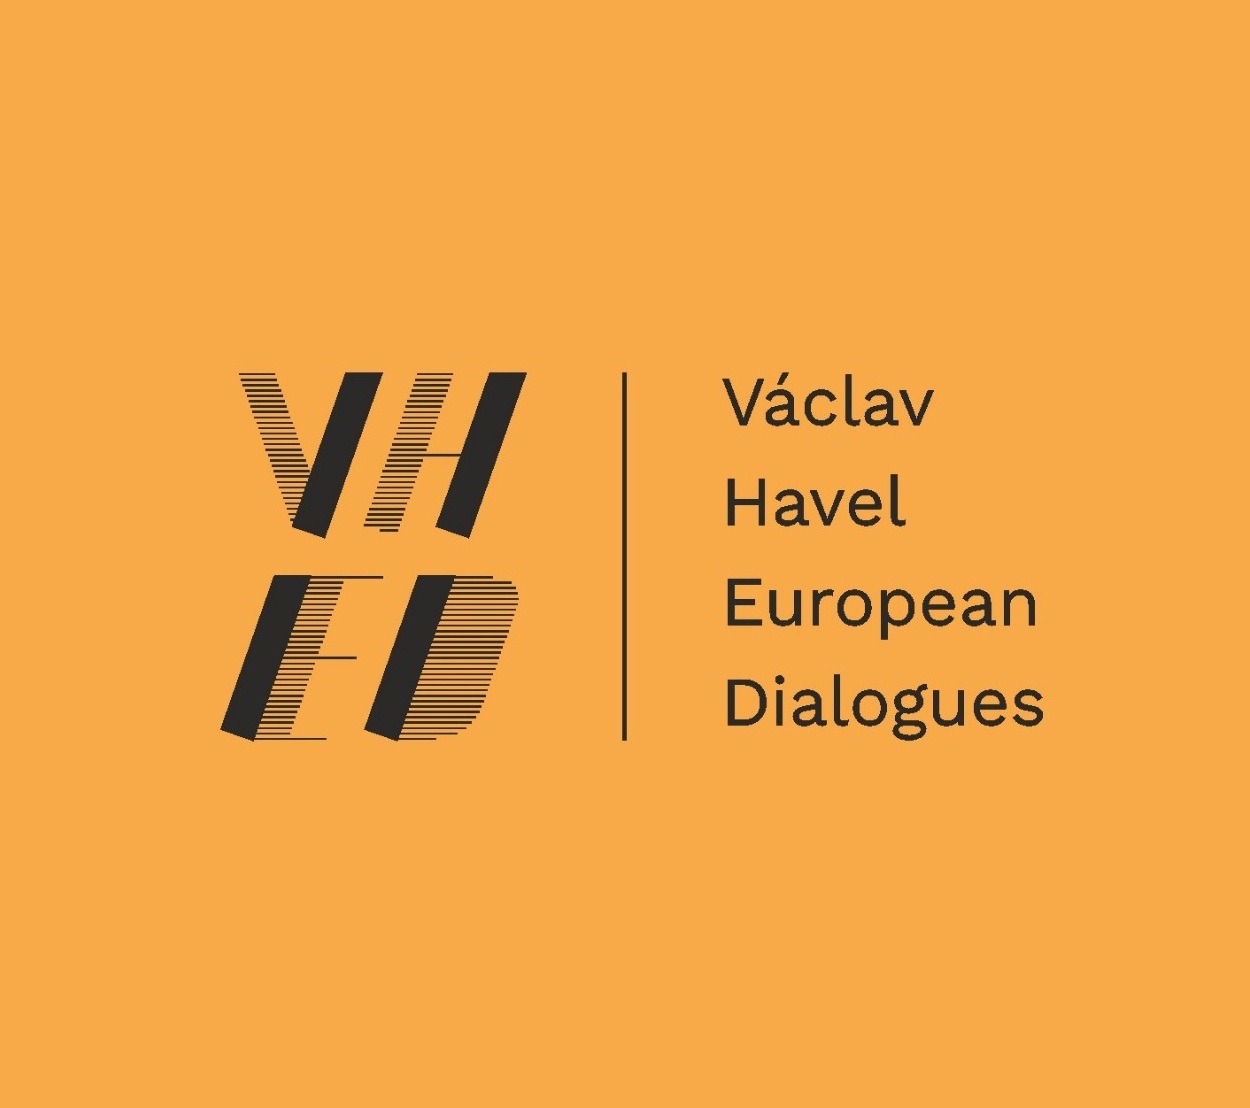 Václav Havel European Dialogues: The truth of politics and the politics of truth, Brno